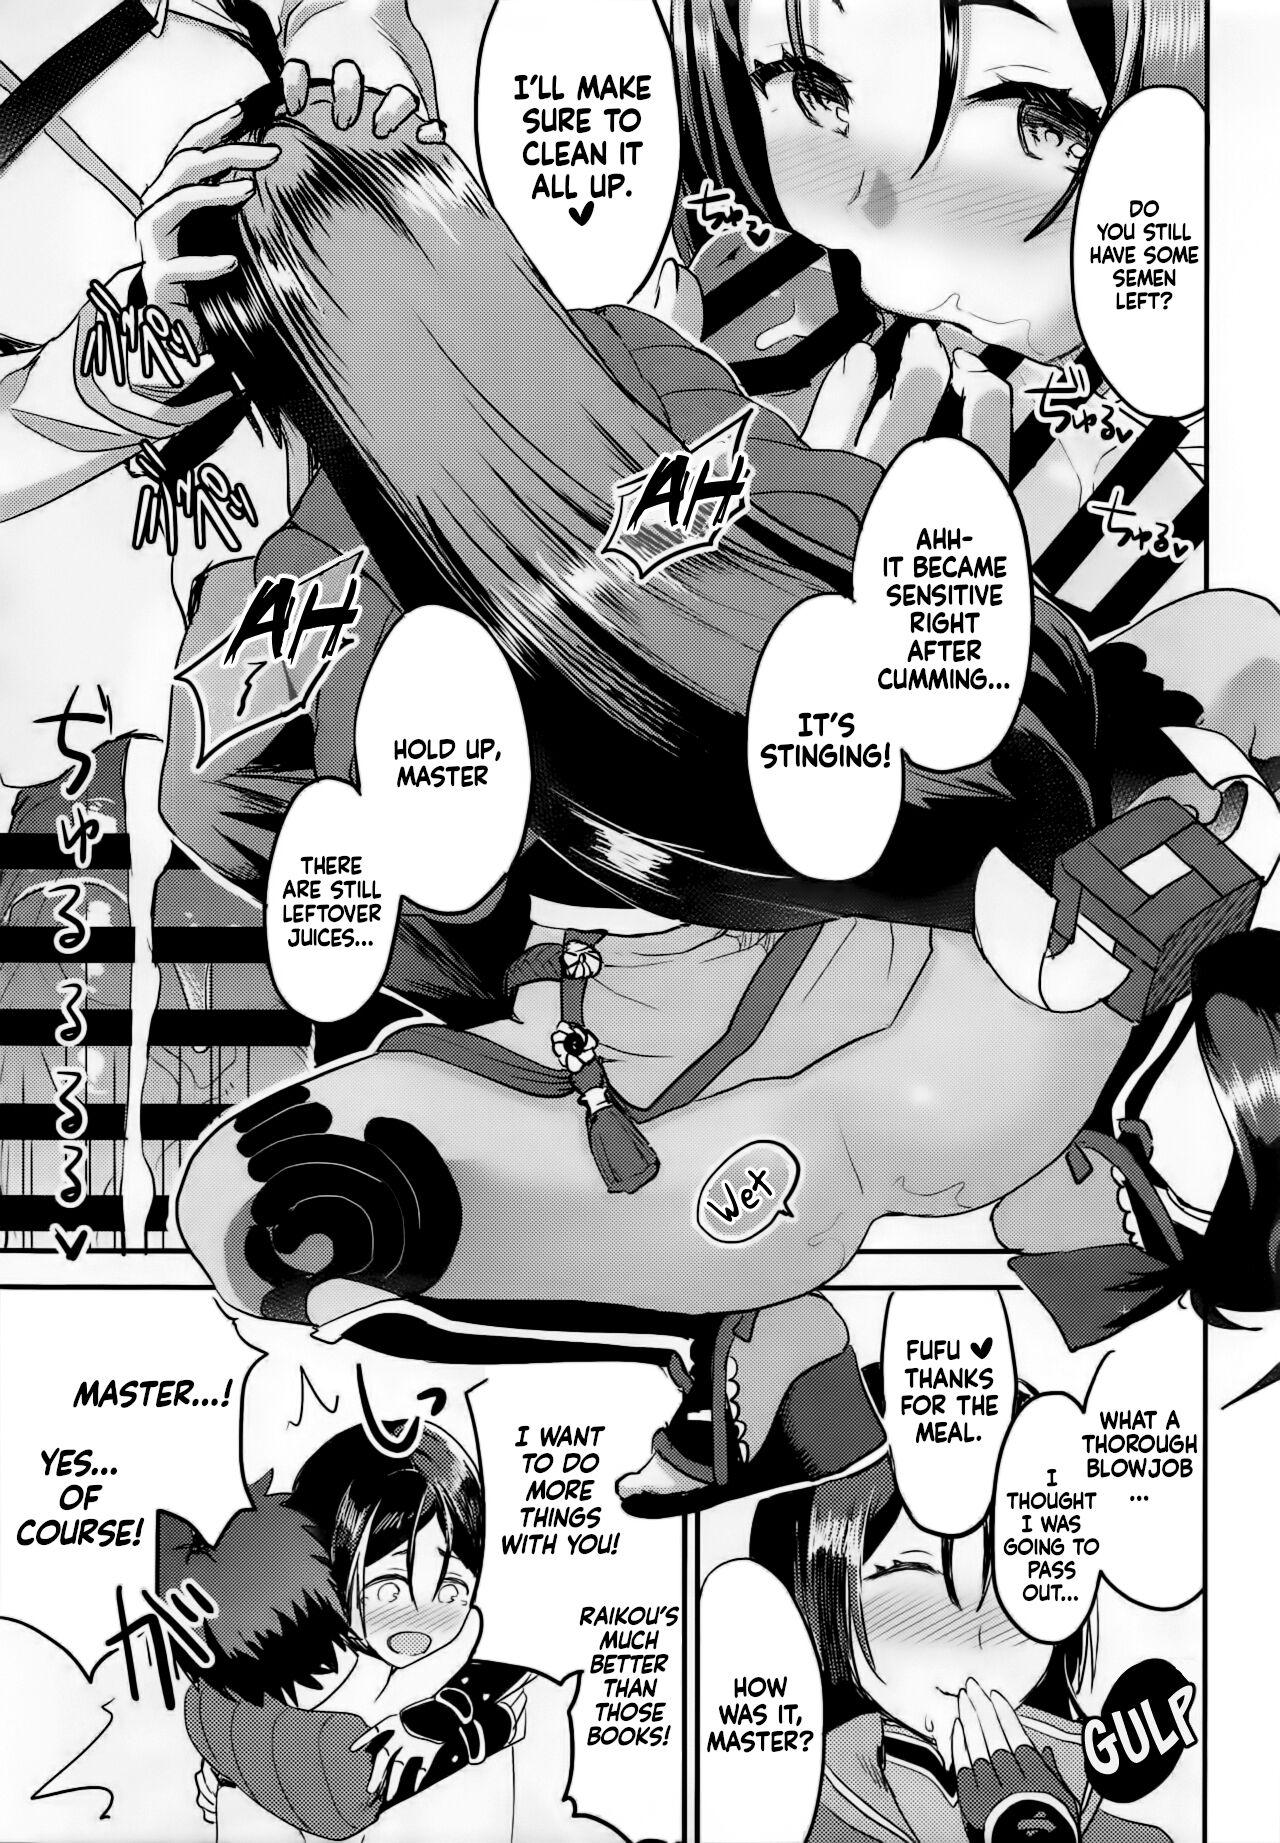 Van Look at your mama only! - Fate grand order Hot Girl - Page 9